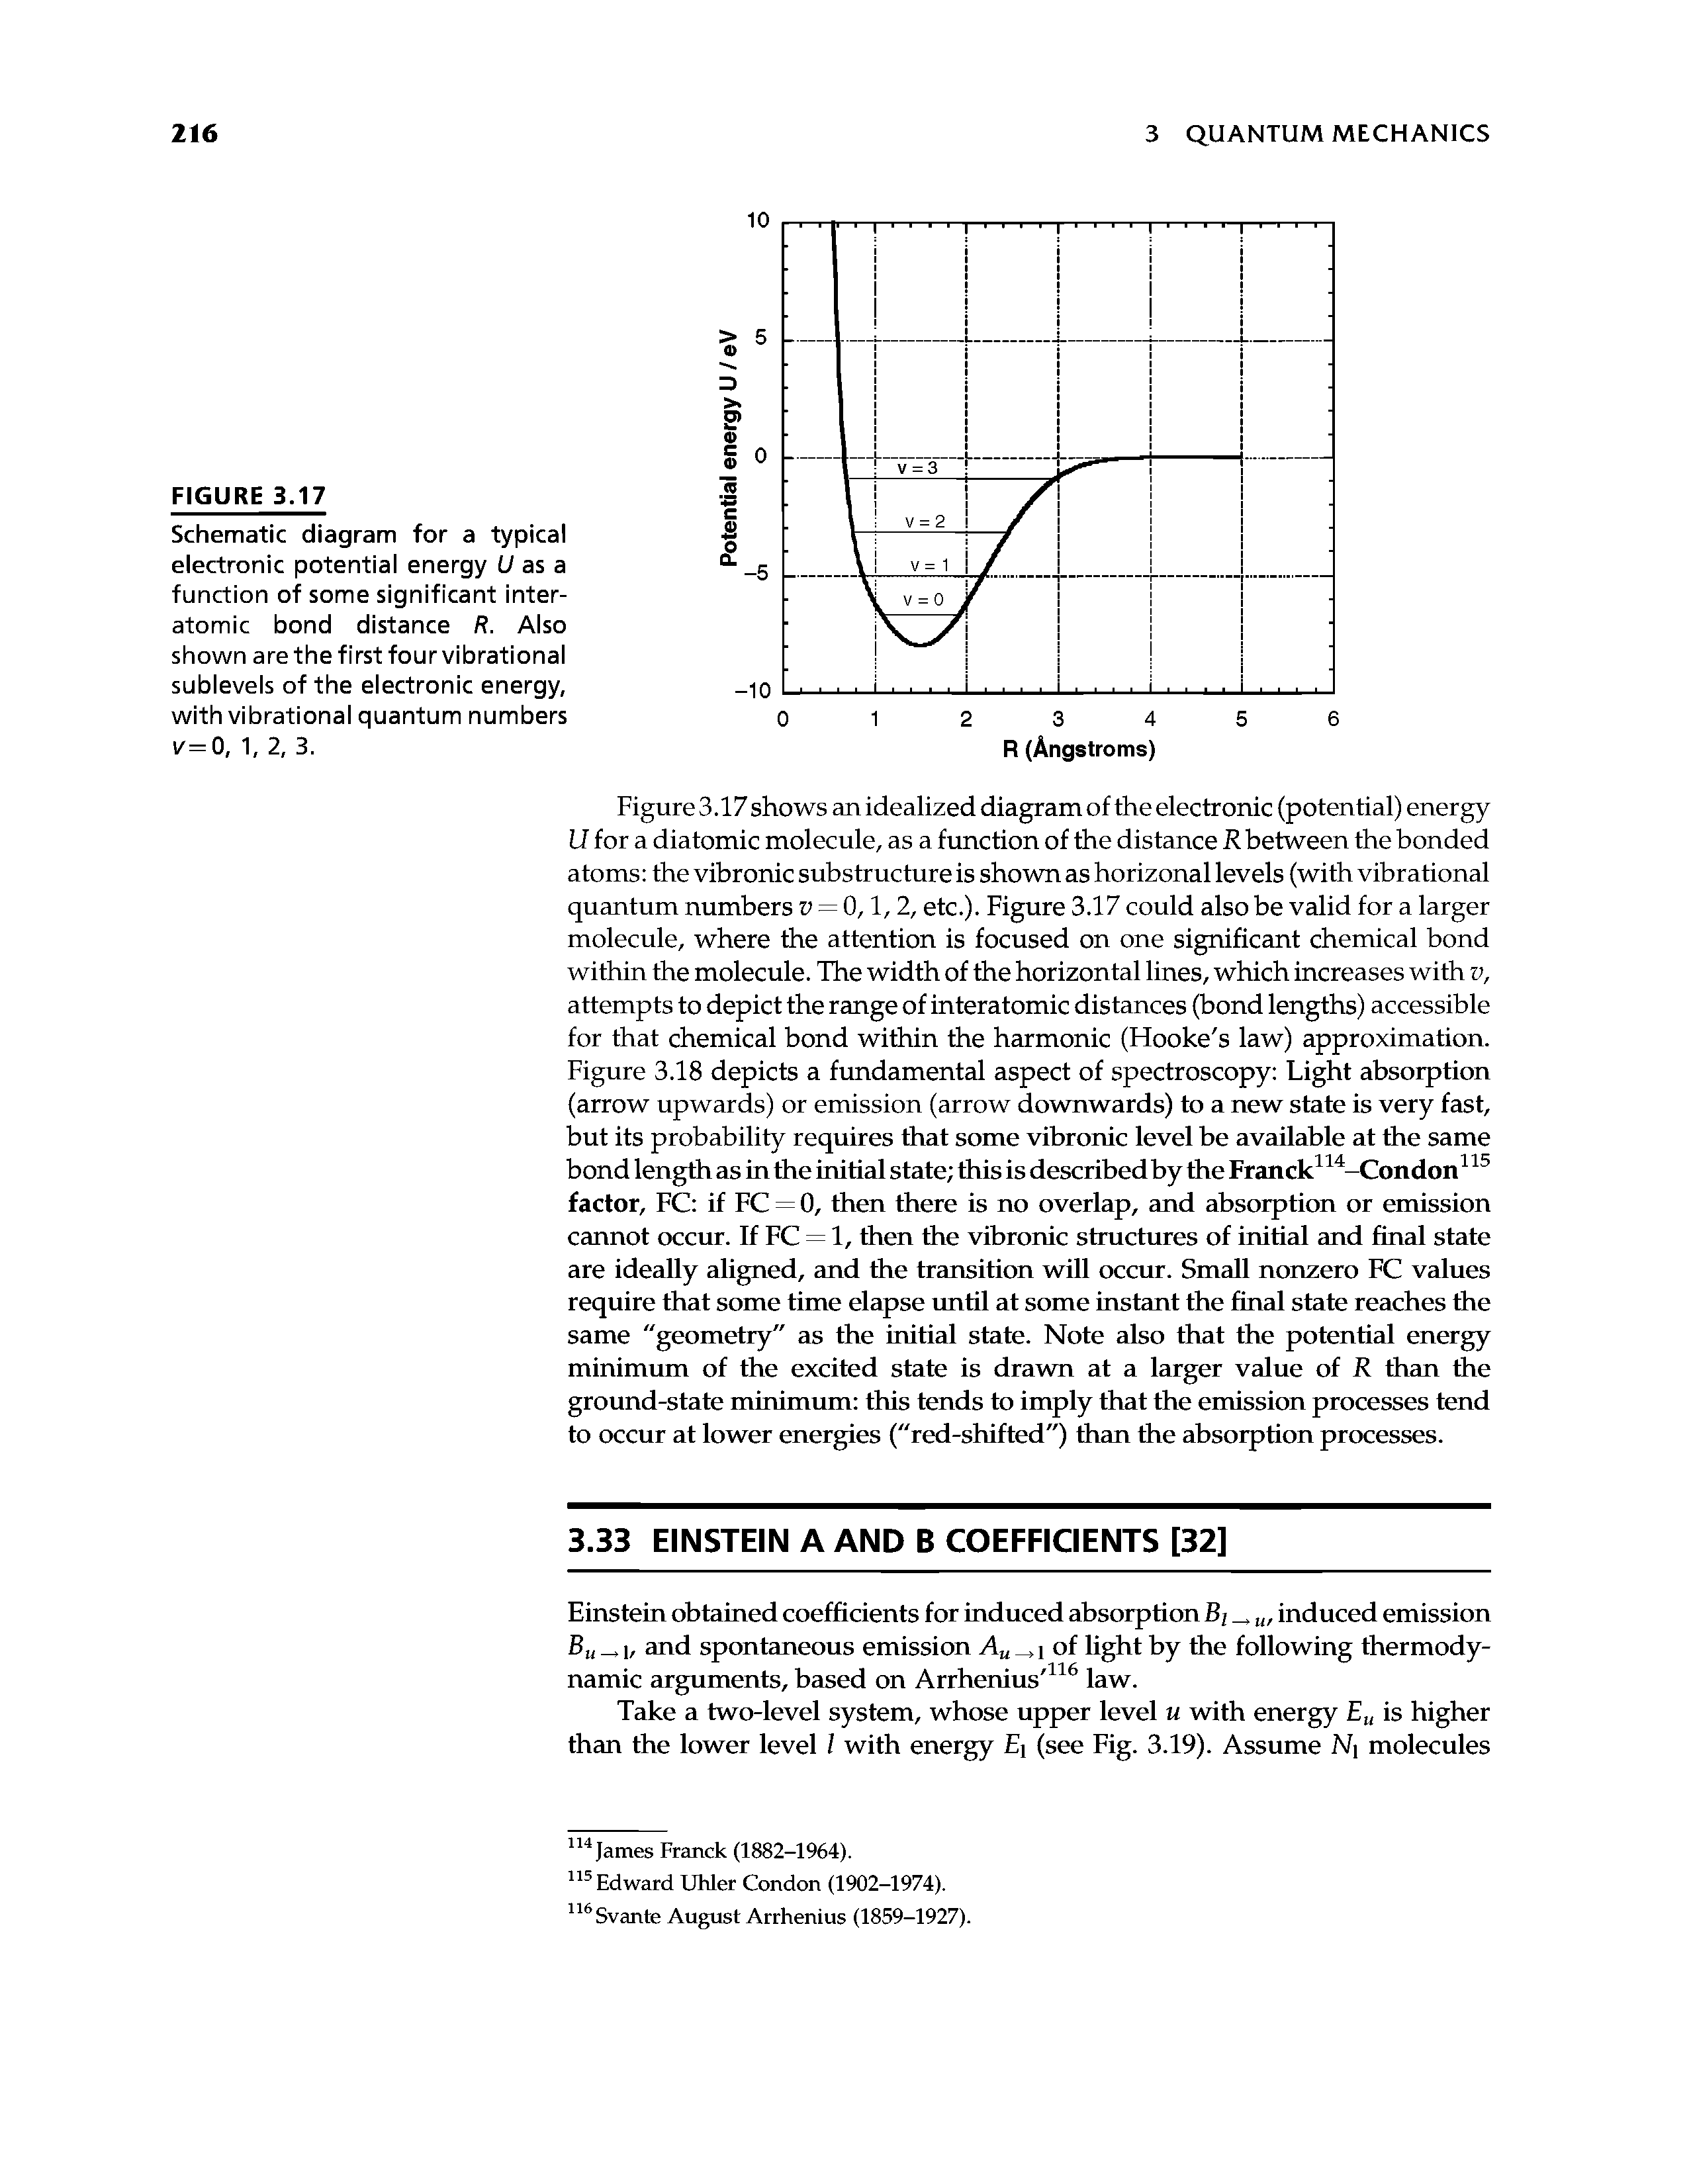 Schematic diagram for a typical electronic potential energy U as a function of some significant interatomic bond distance R. Also shown are the first four vibrational sublevels of the electronic energy, with vibrational quantum numbers v=0, 1, 2, 3.